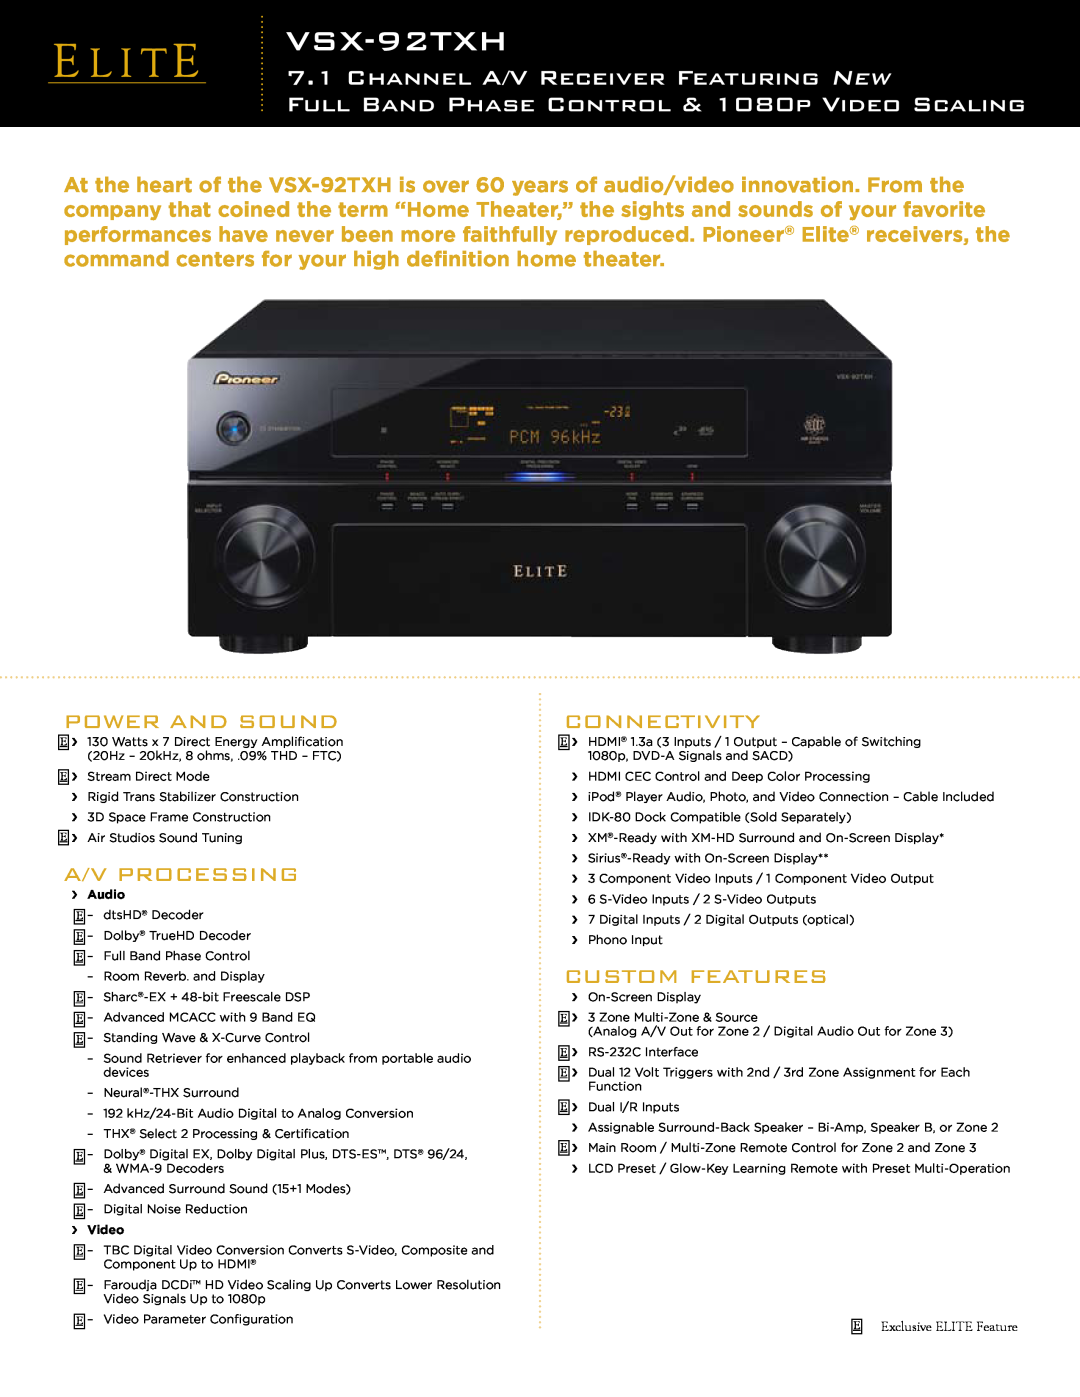 Elite VSX-92TXH manual Channel A/V Receiver Featuring New, FULL BAND PHASE CONTROL & 1080P VIDEO SCALING, Power And Sound 